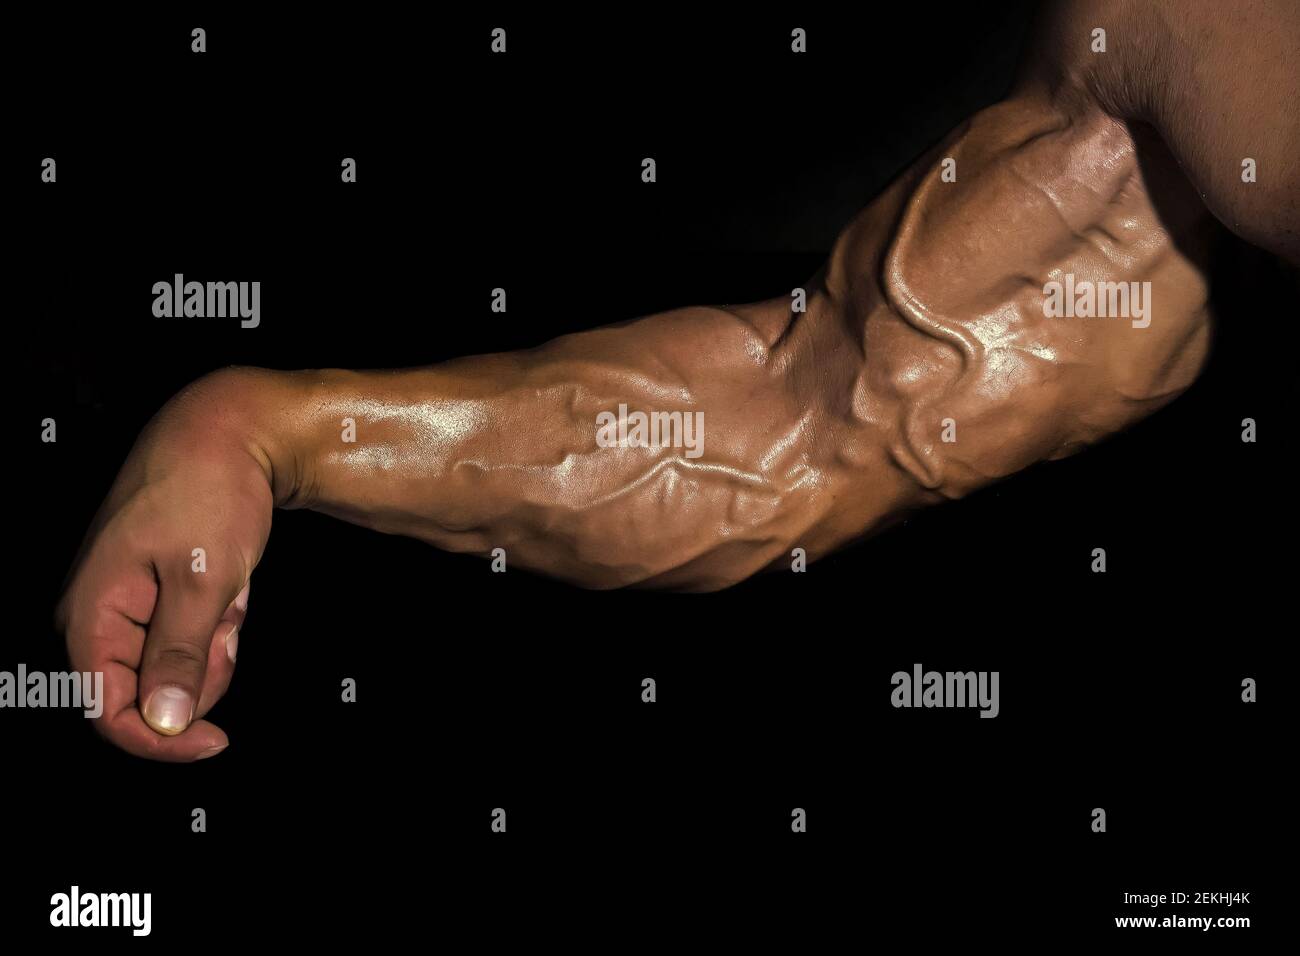 Triceps Biceps: Over 7,627 Royalty-Free Licensable Stock